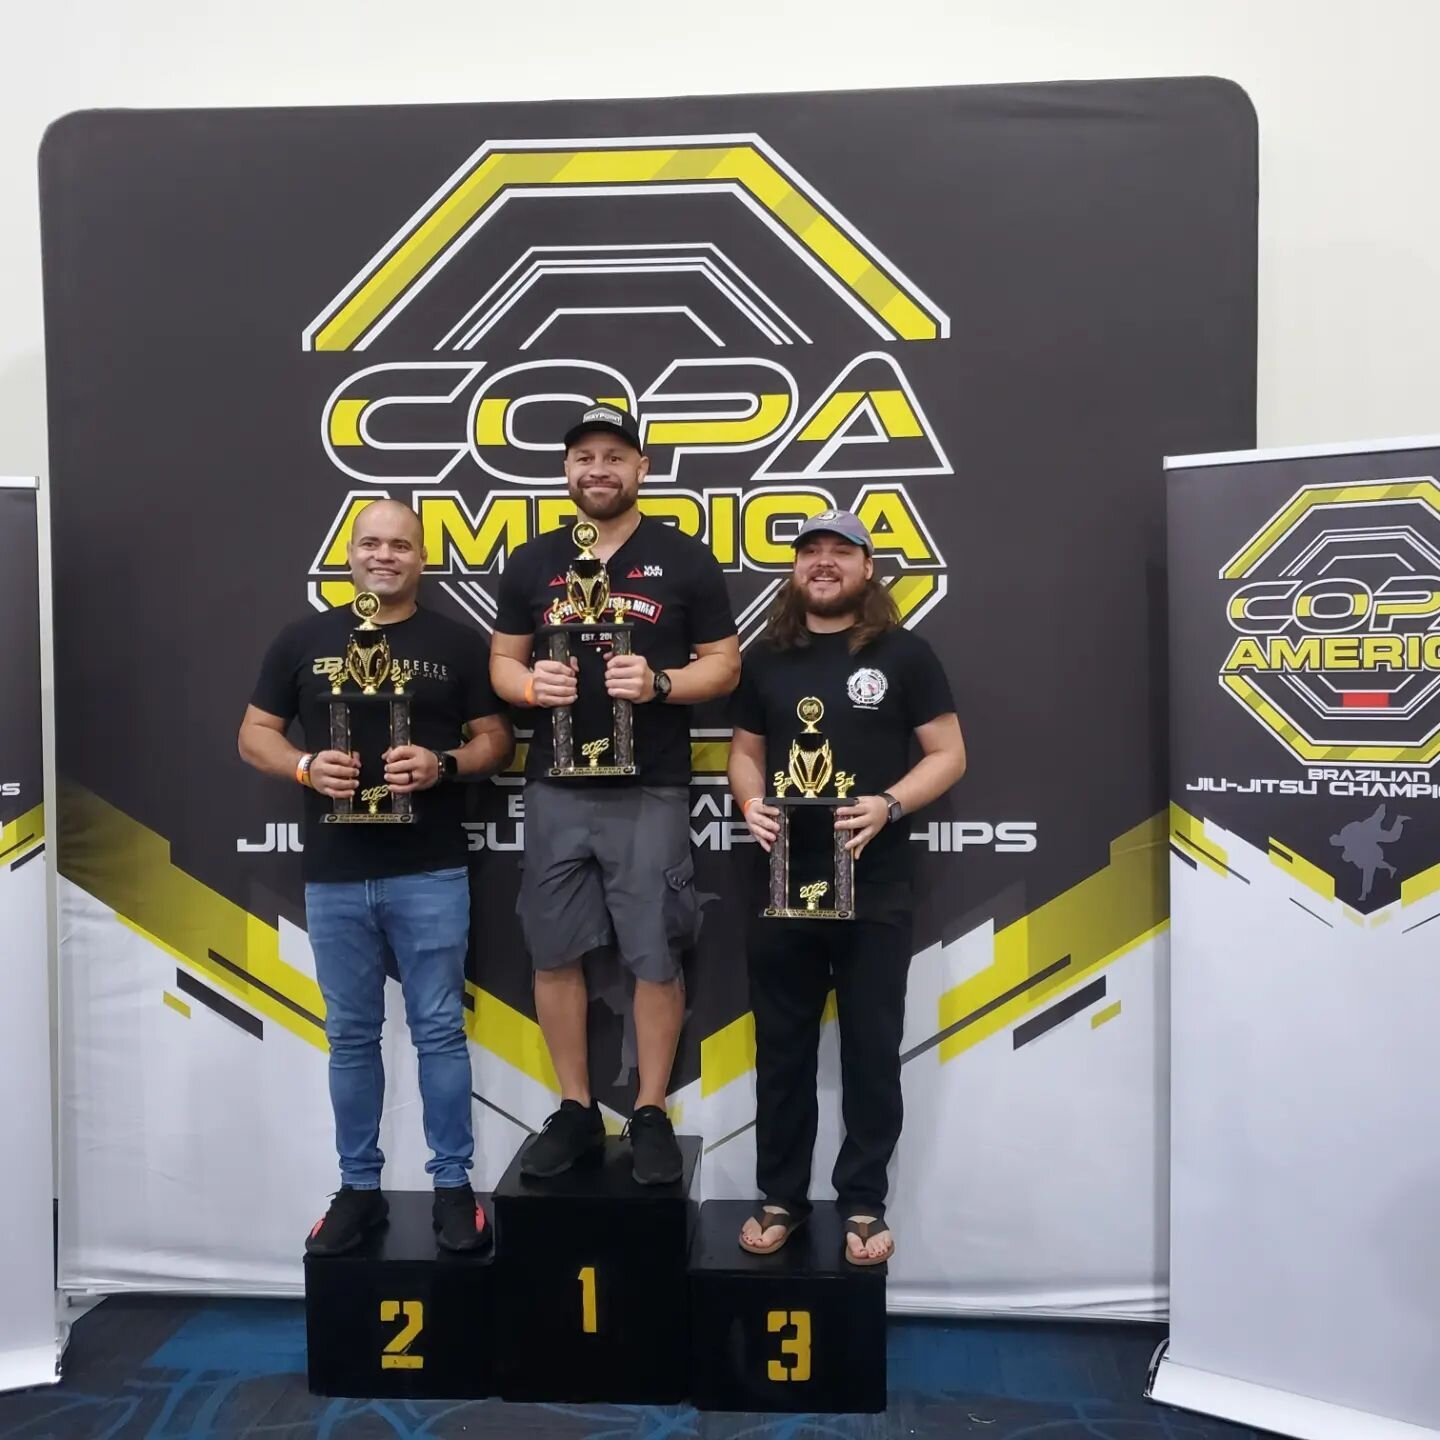 Congratulations to all our students that competeted today helping us to win the First place Team trophy @copaamericabjj  today. Outstanding work from our competitors and coaches.

#teamwork #jiujitsufamily #🥋 # capjjmma